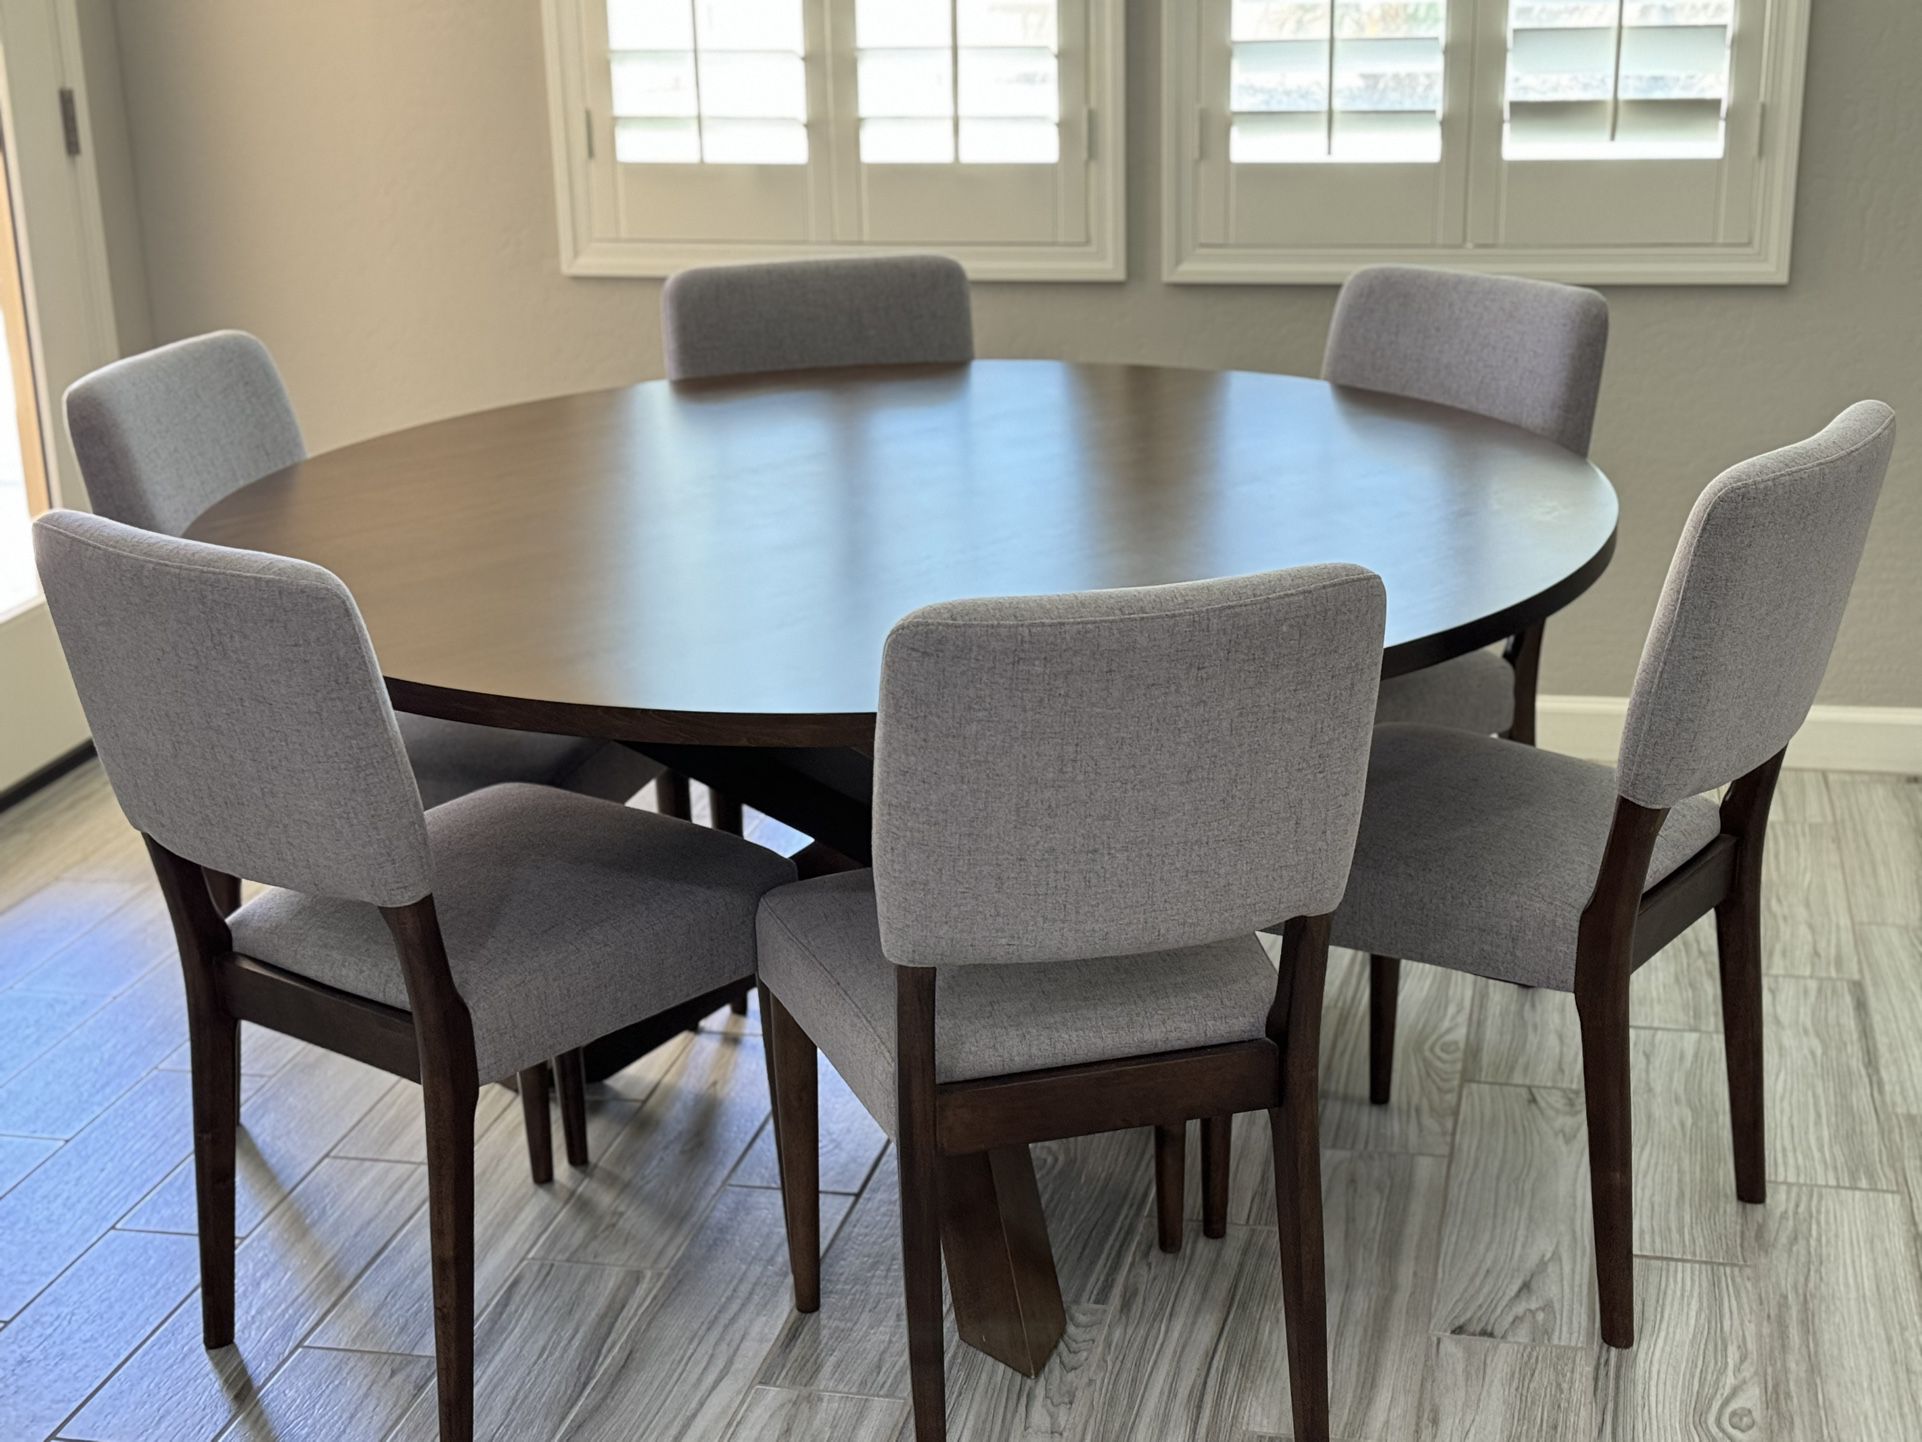 60” Modern Dining Table & Chairs